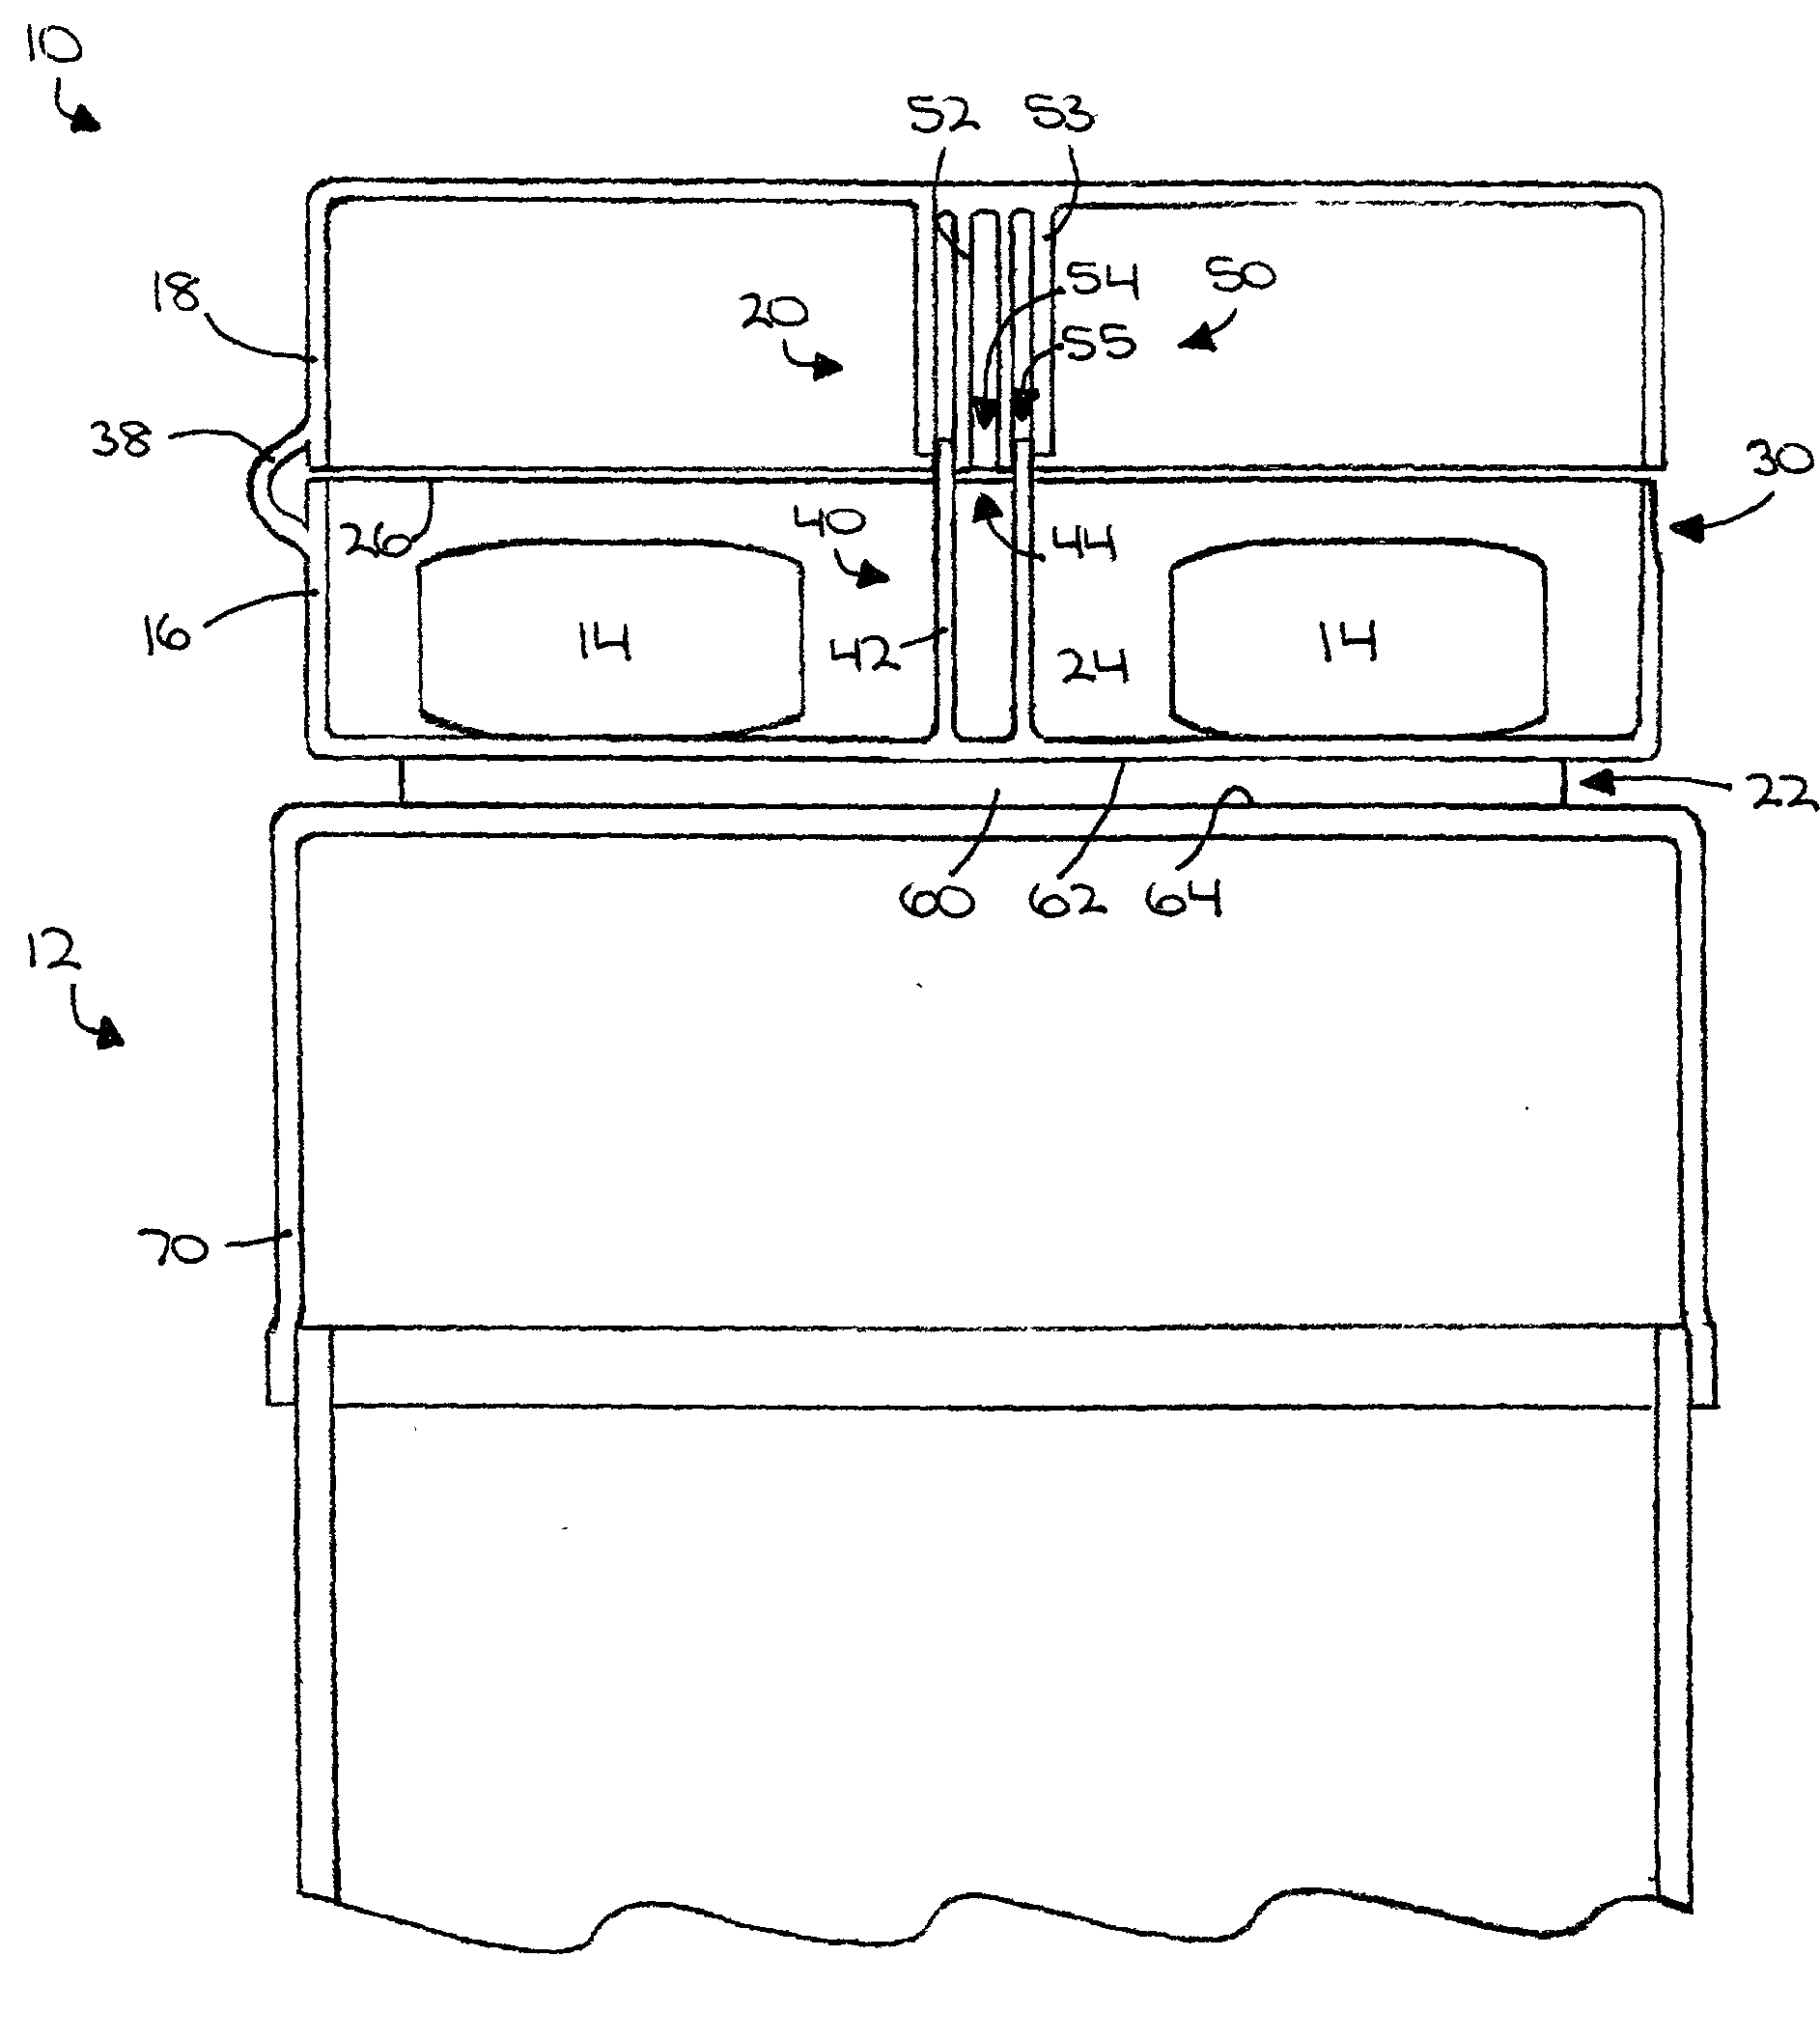 Auxiliary container for physical association with conventional medication container